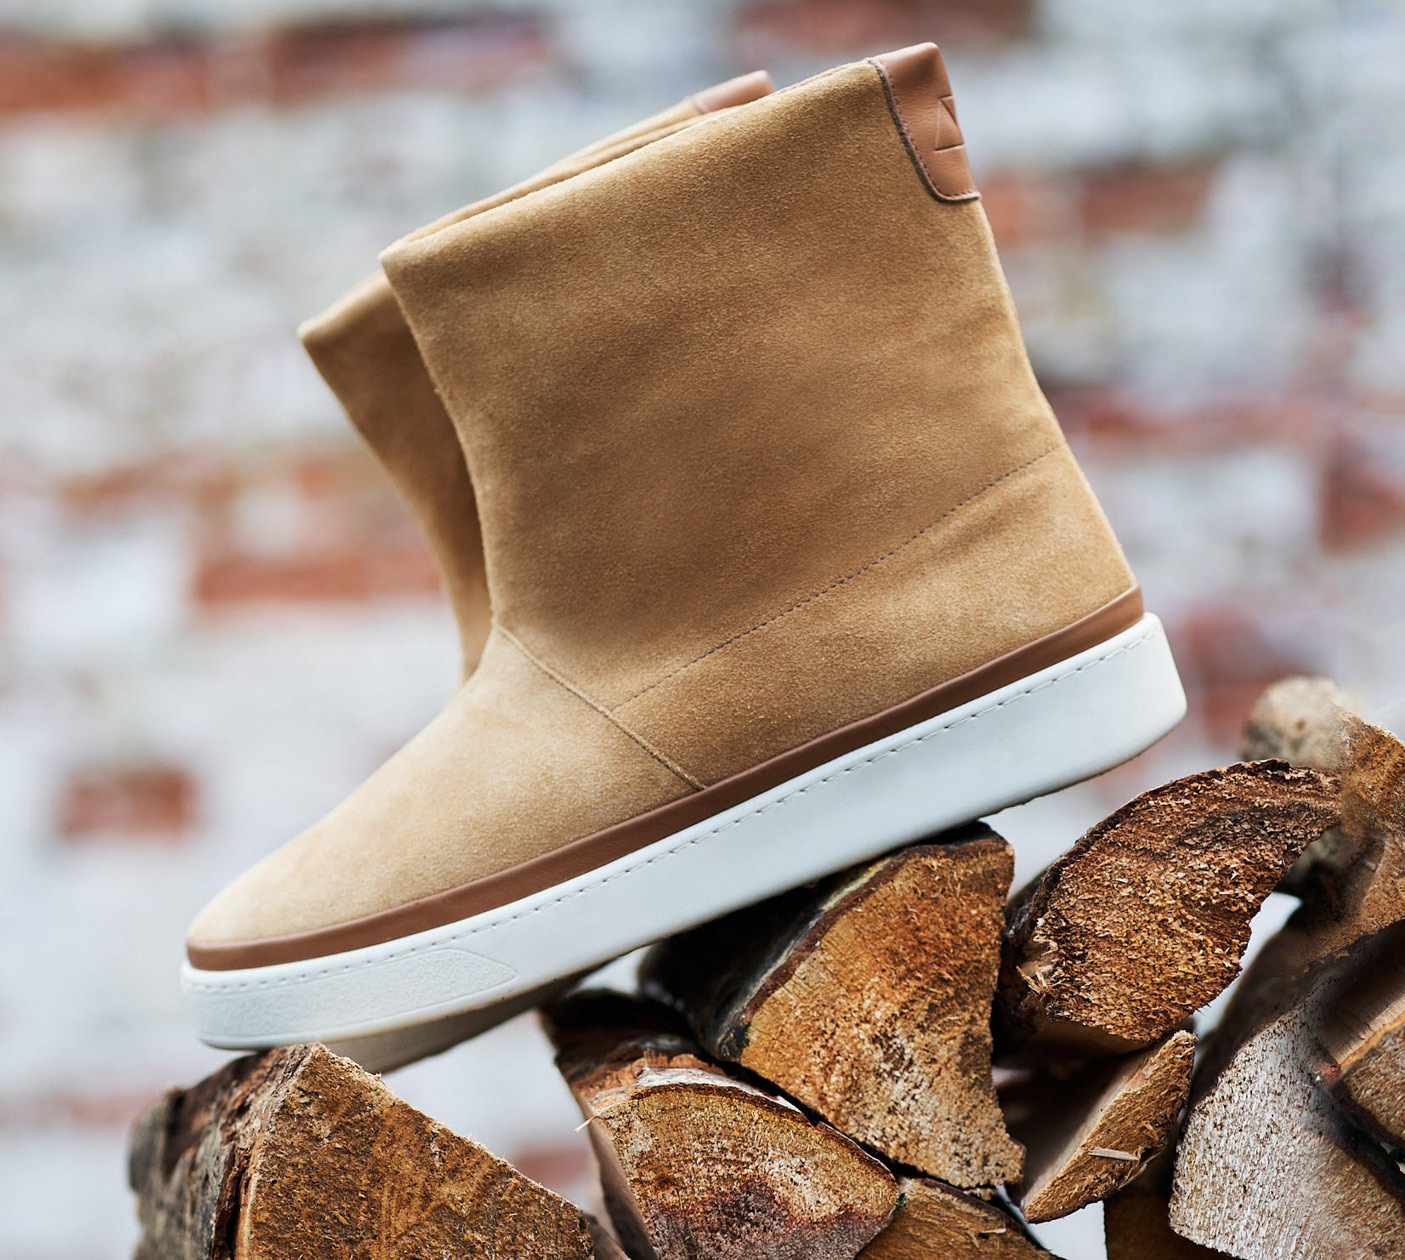 Winter Style - Tan Winter Boots for Men with Sheepskin